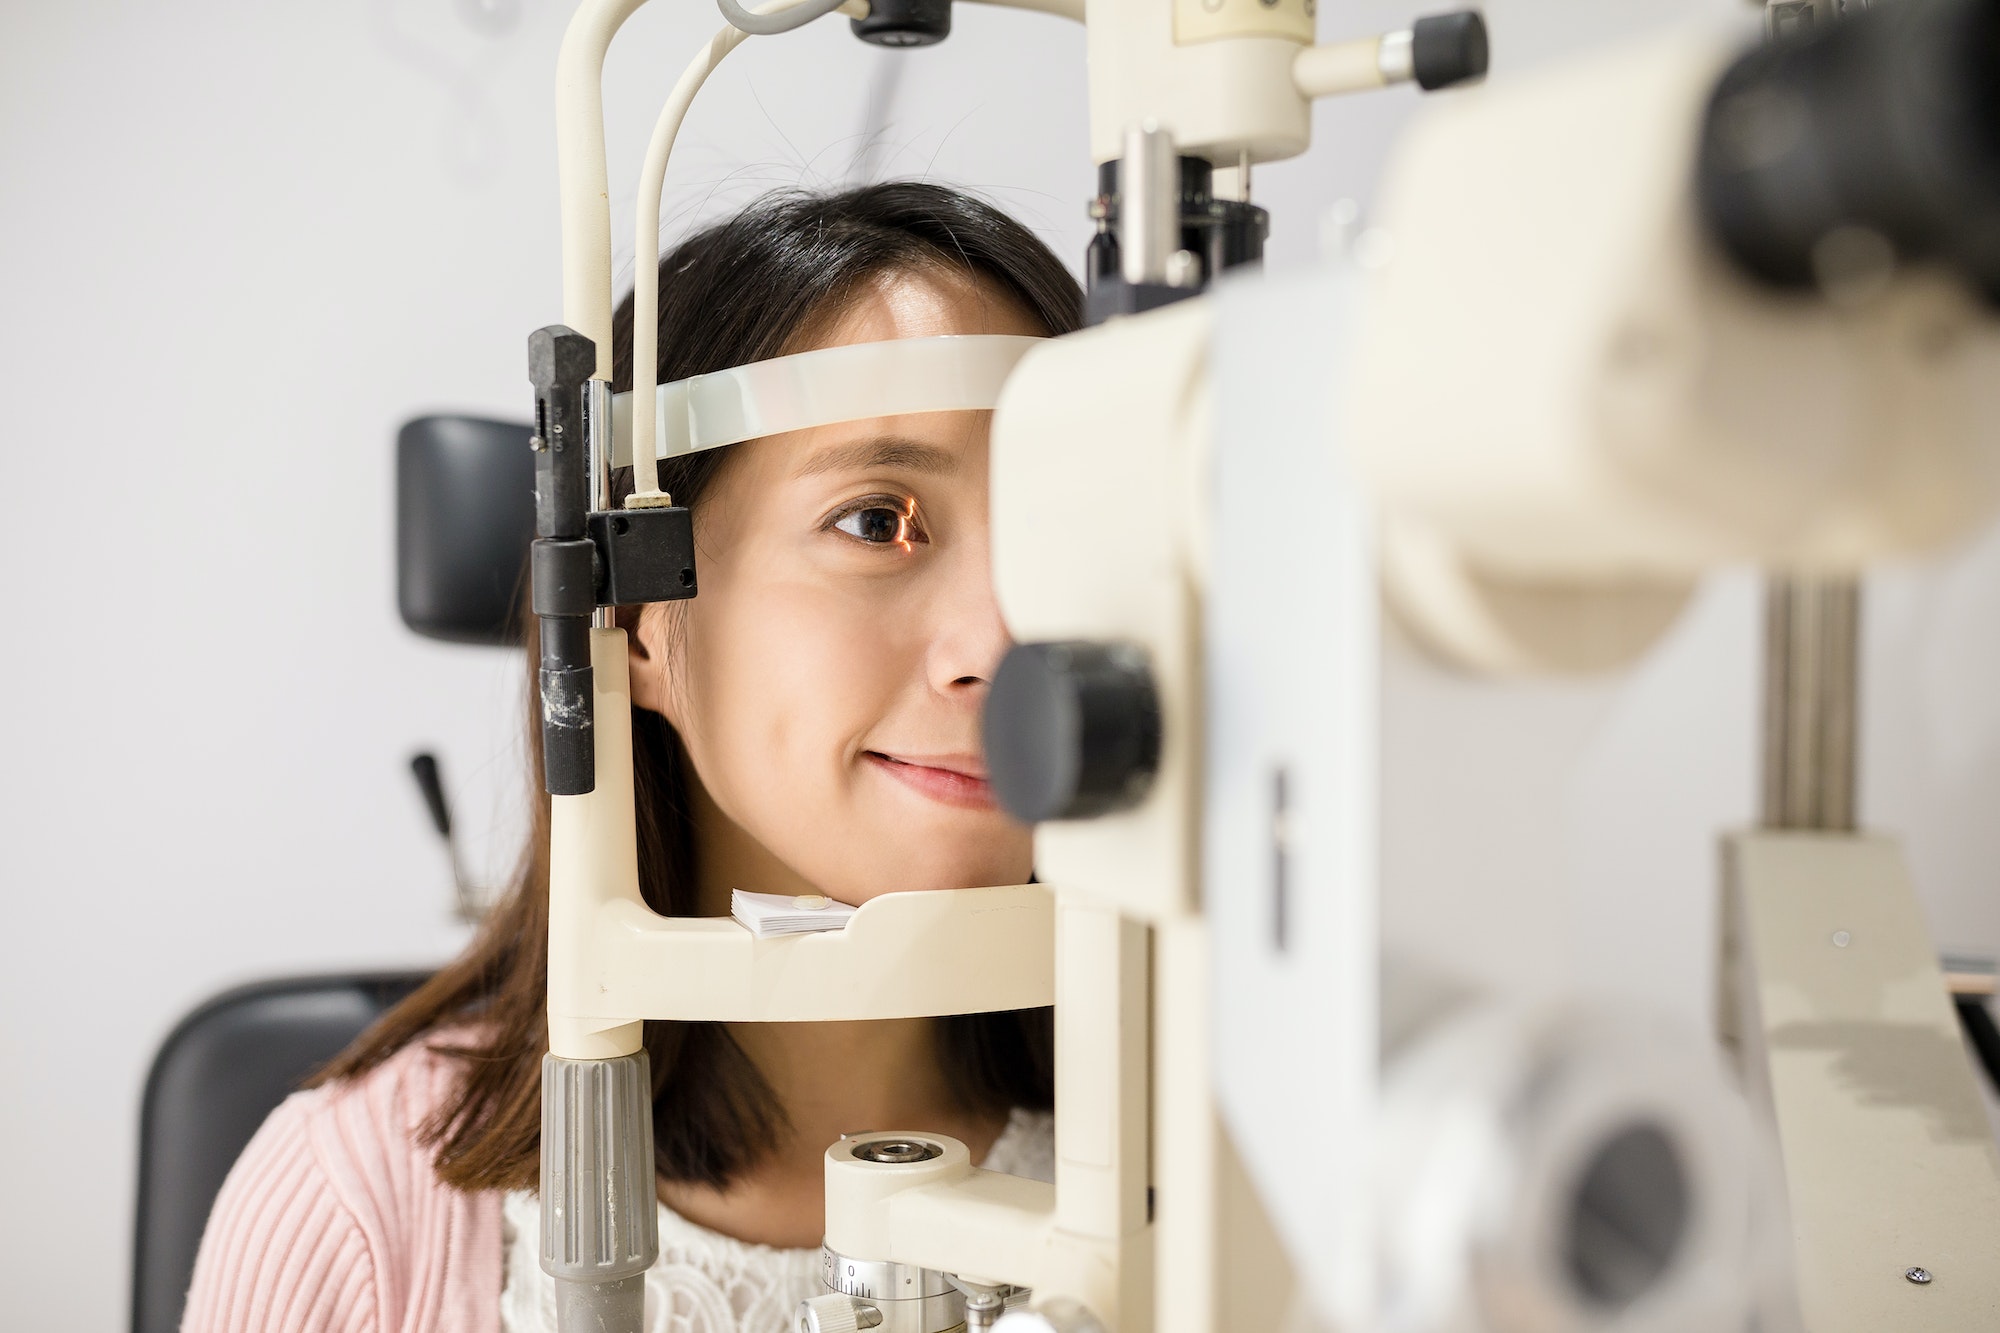 Patient doing the eye test at eye clinic